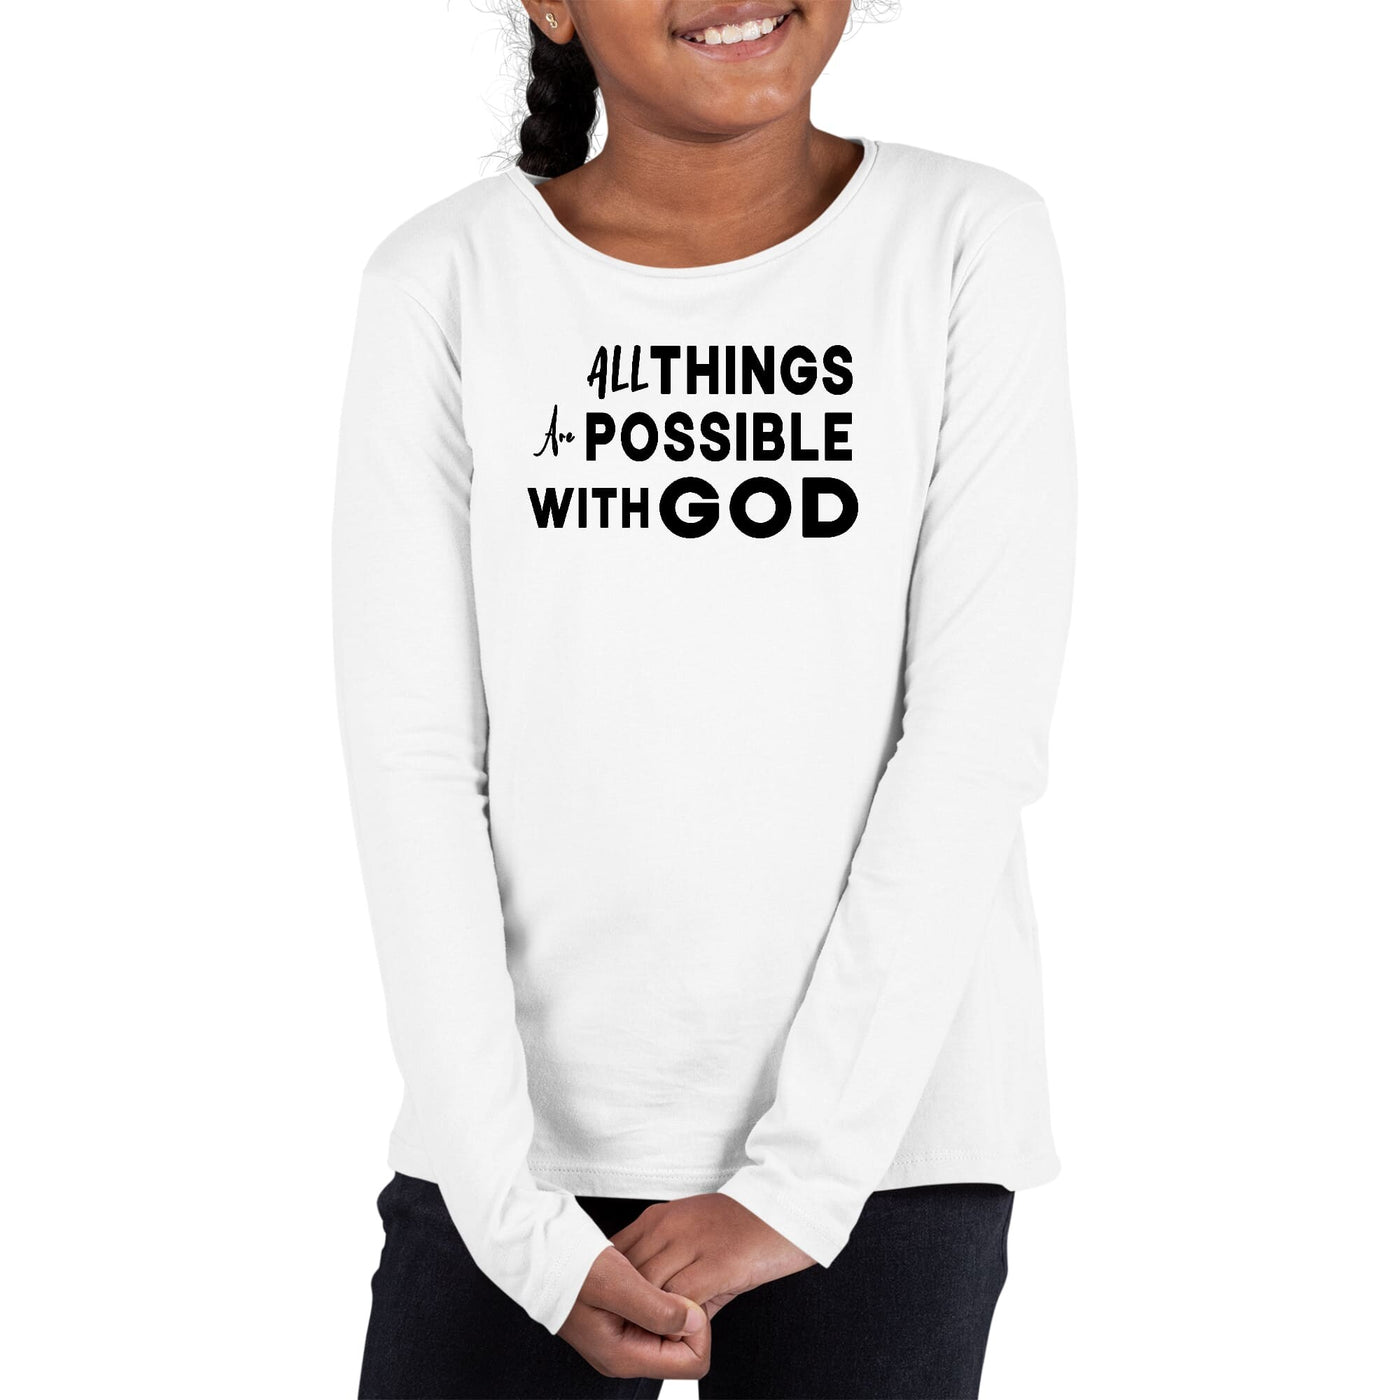 Girls Graphic T-Shirt All Things Are Possible With GOD Black - Girls | T-Shirts